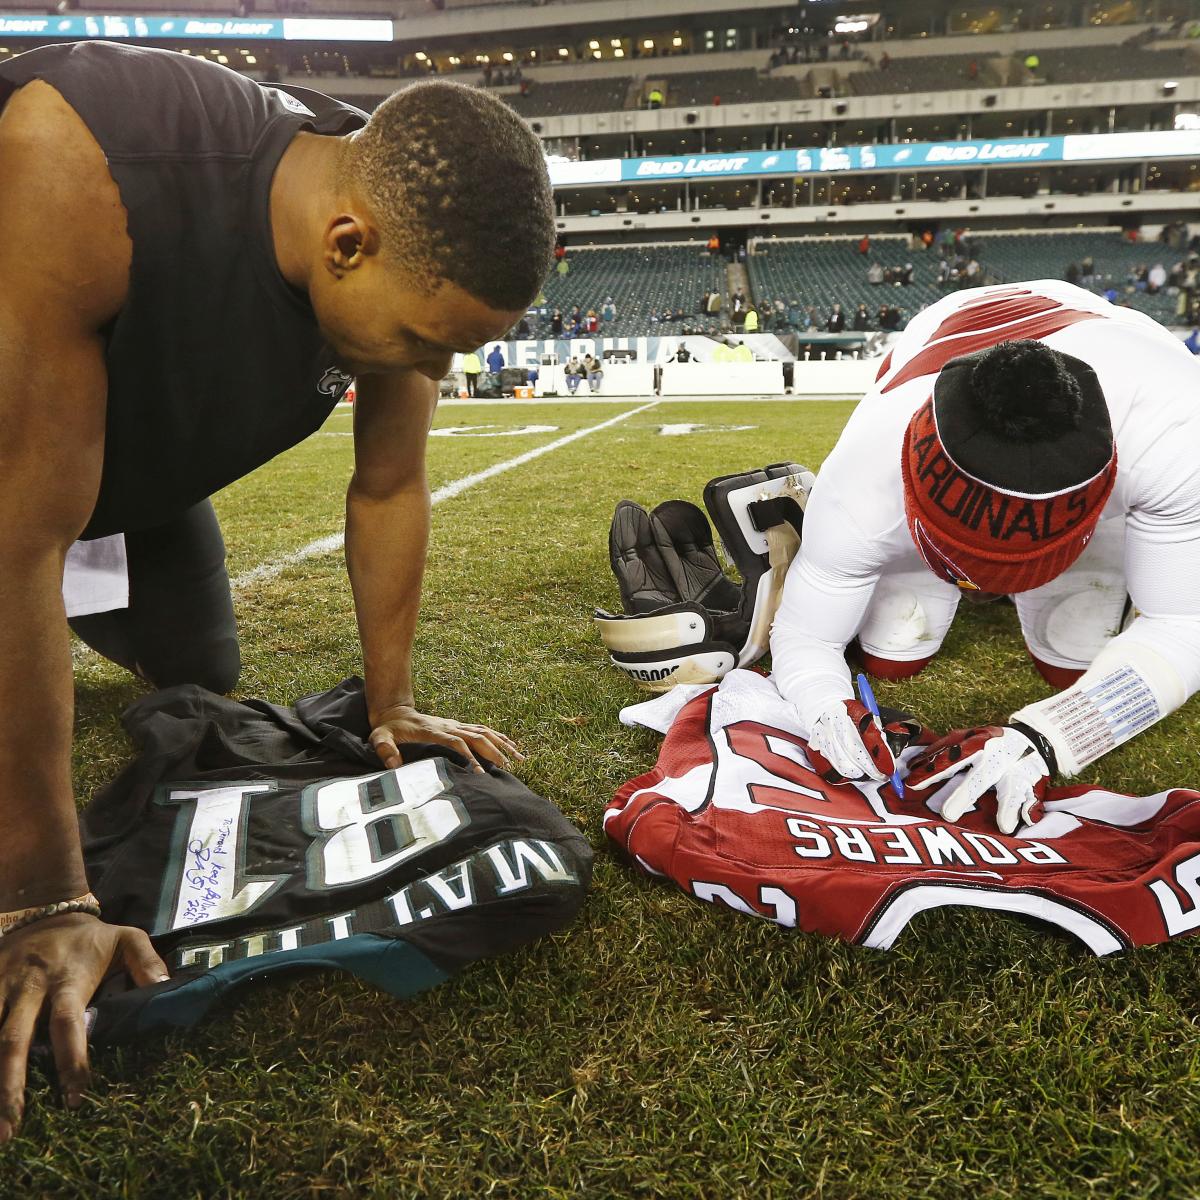 10 Recent Awesome Acts of Sportsmanship | Bleacher Report ...